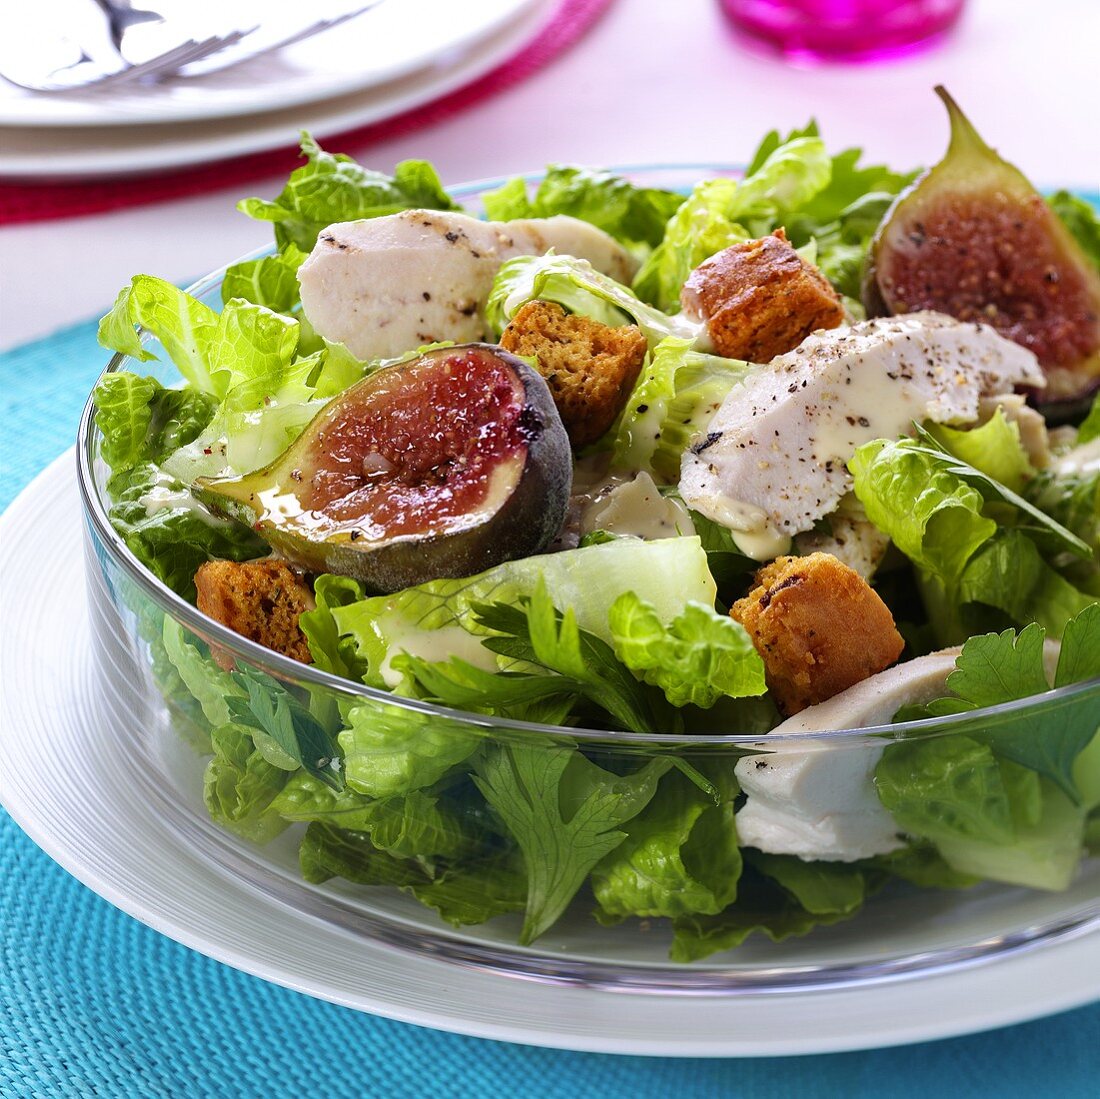 Caesar salad with figs